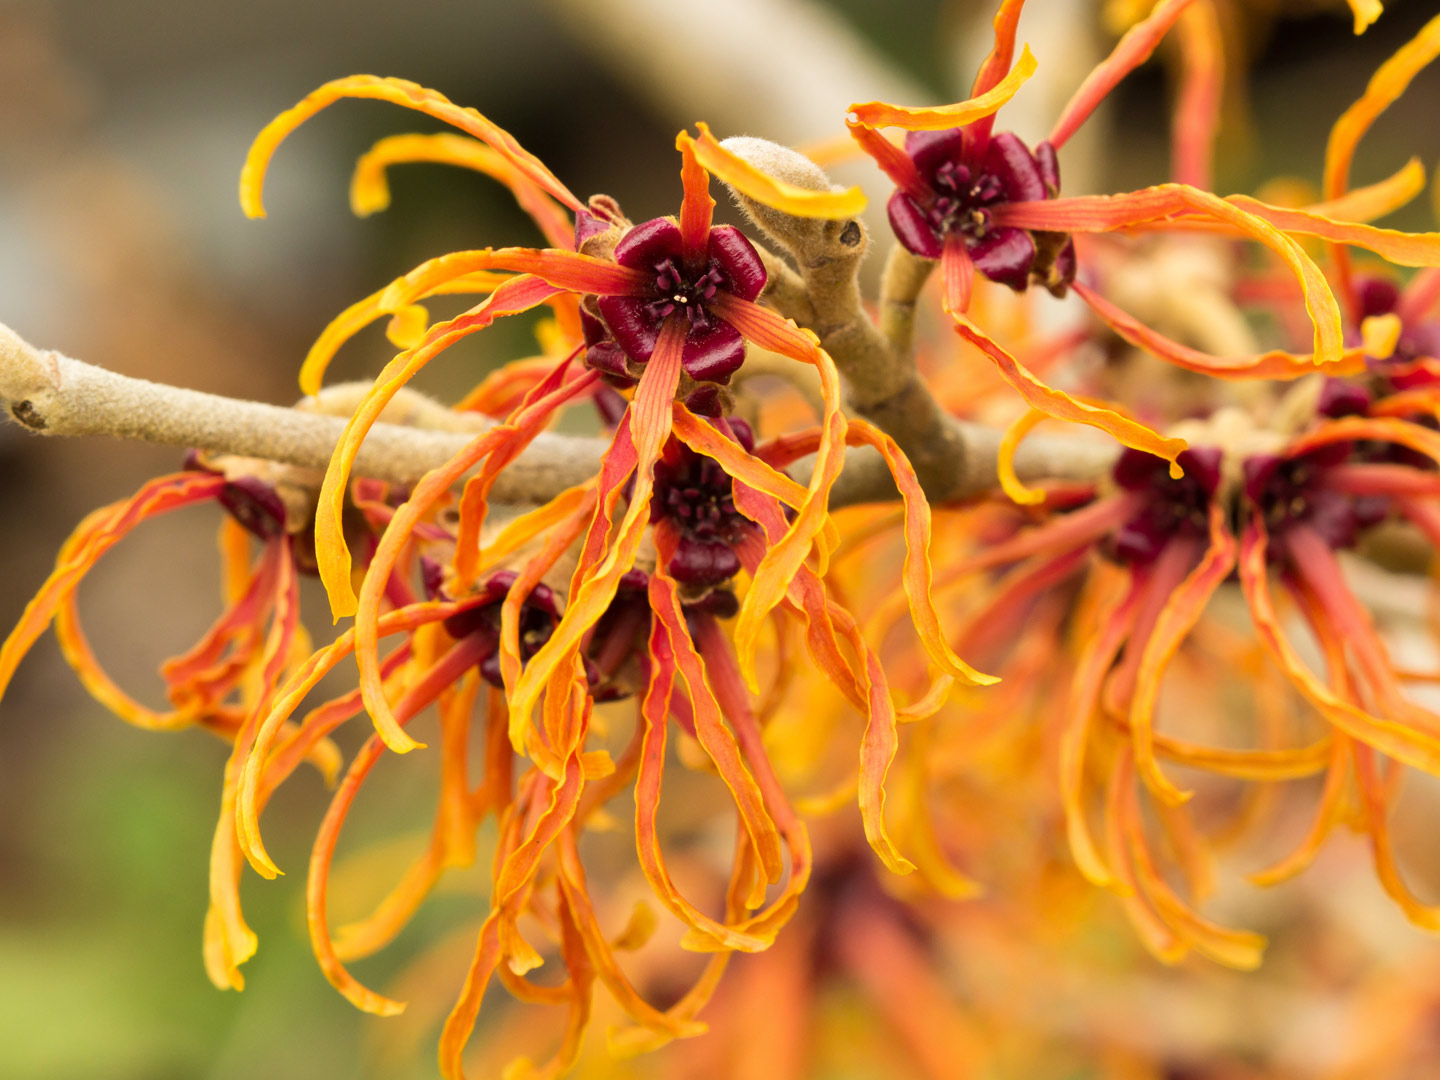 Top Ten Uses For Witch Hazel Personal Care Andrew Weil, M.D. photo image